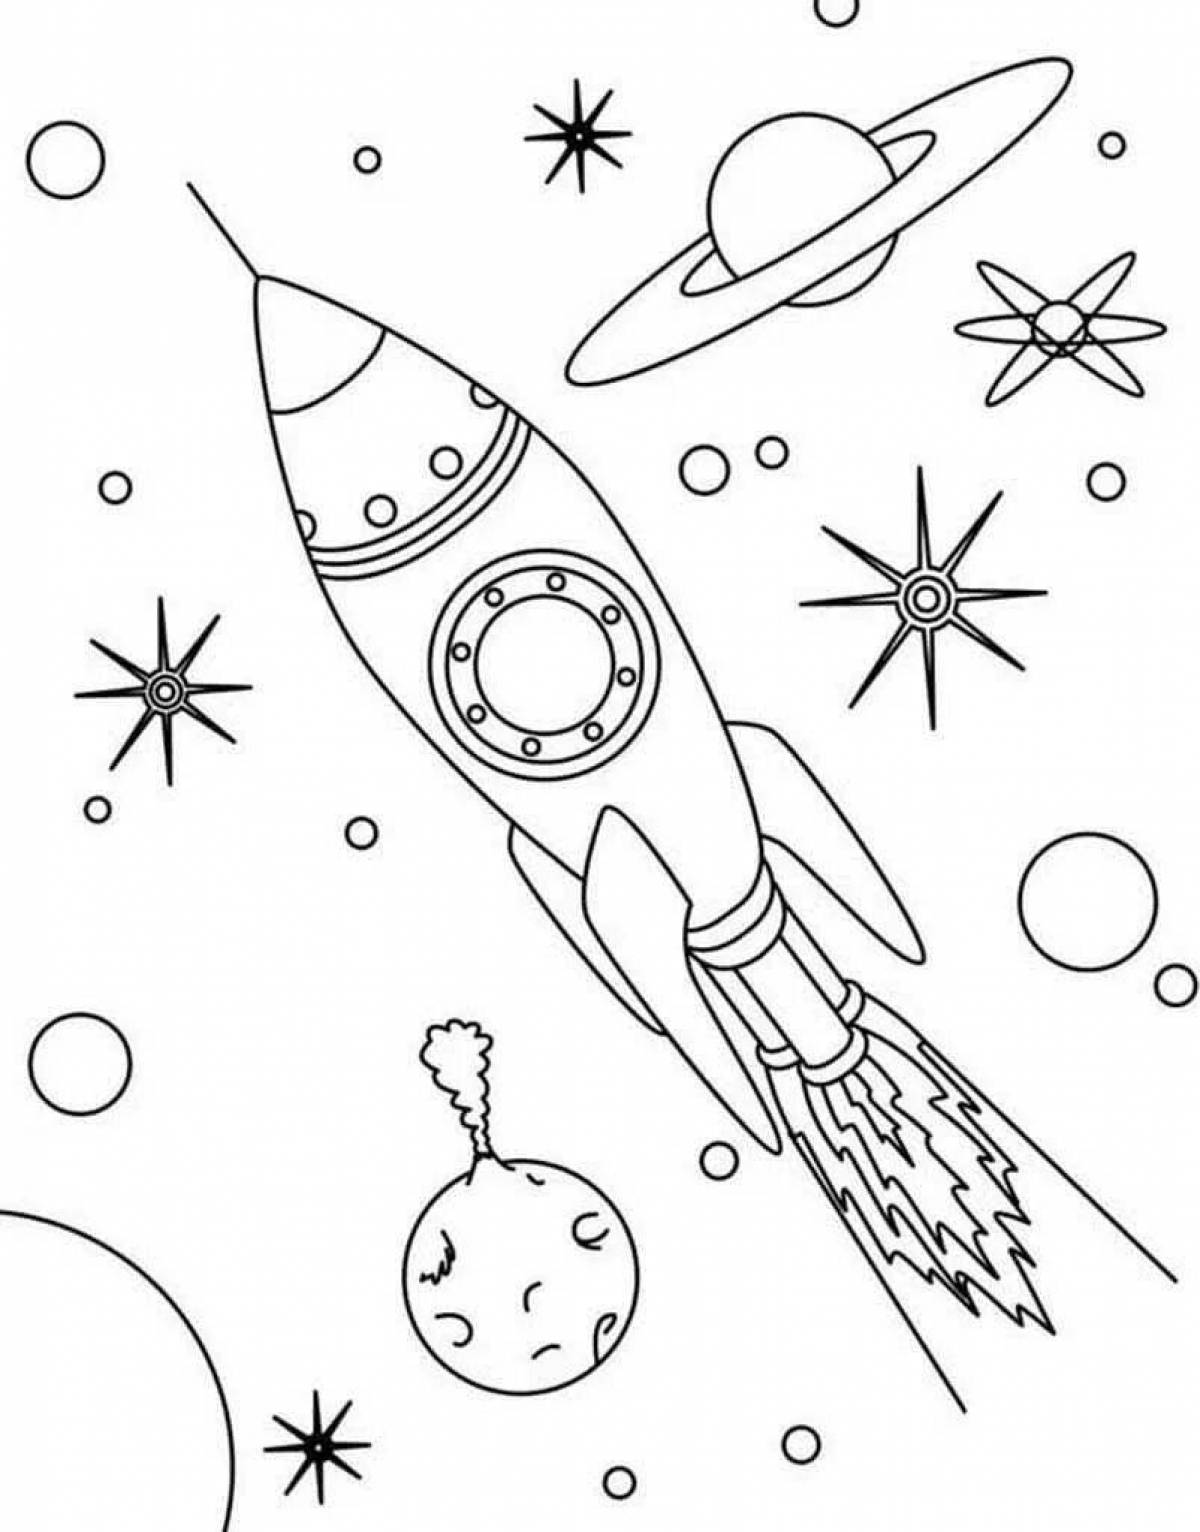 Brightly colored space rocket coloring book